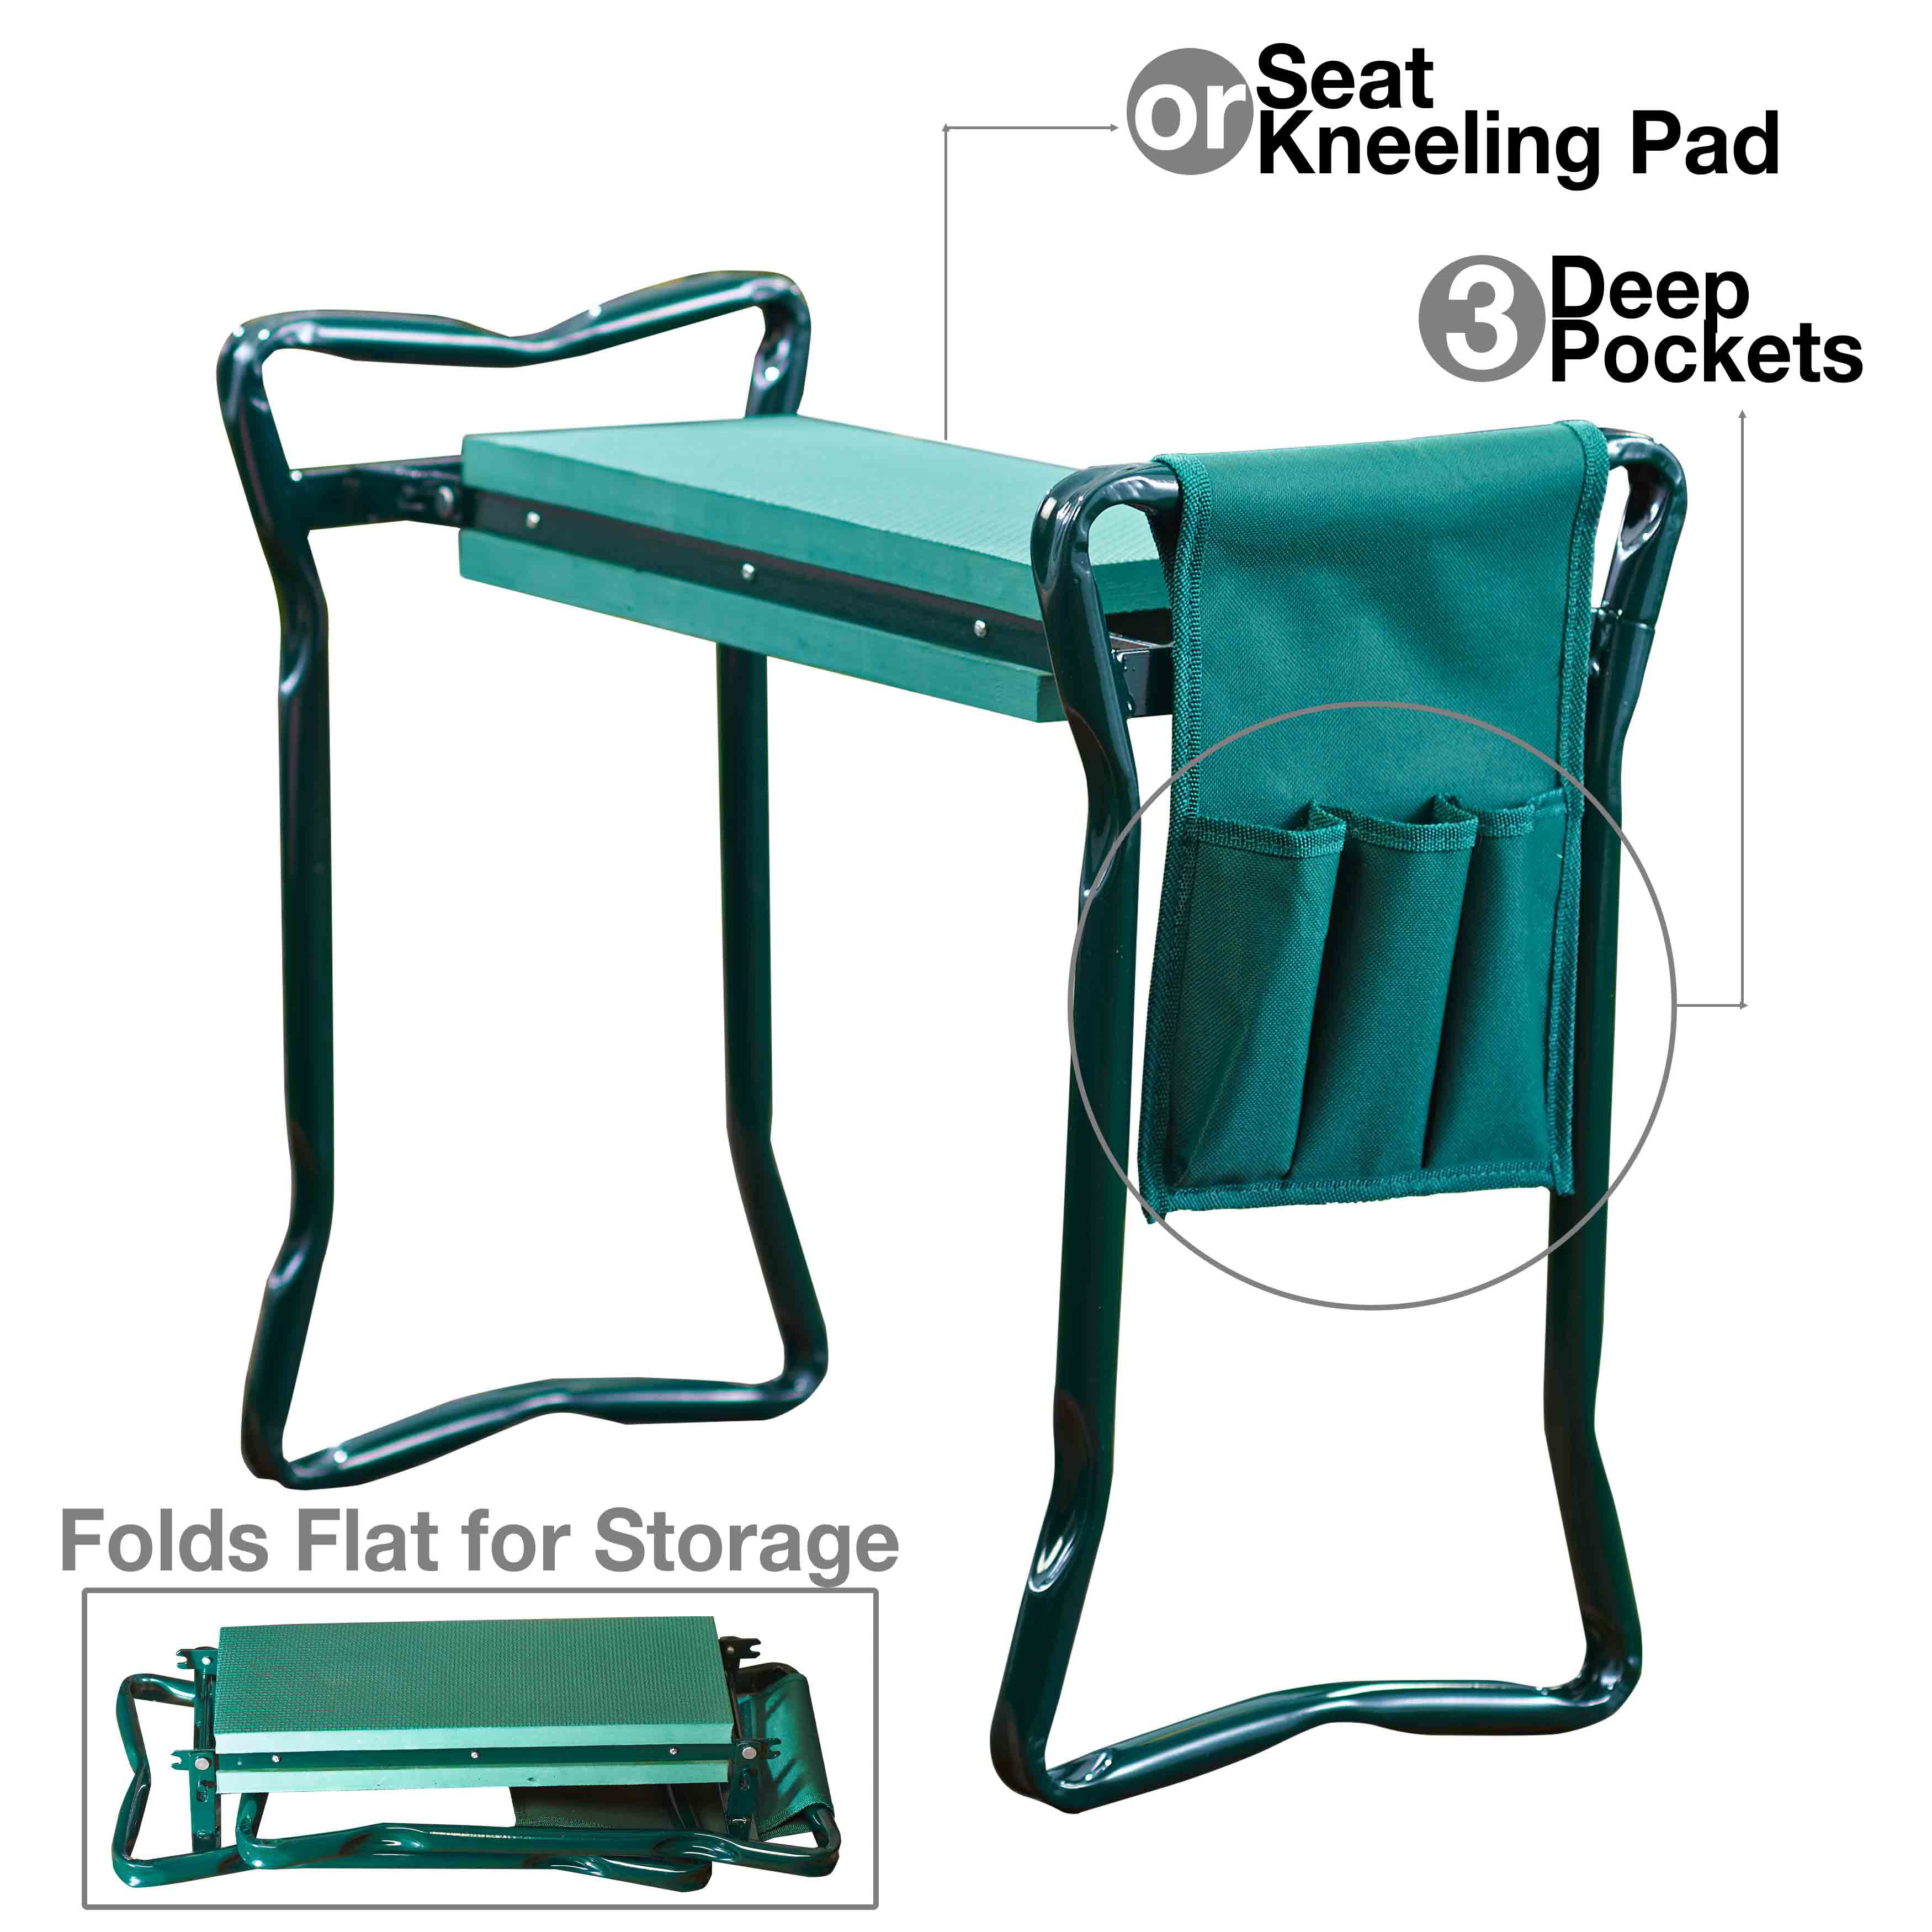 Galax Supply 24 inch 250-lbs Foldable Kneeler Garden Bench Stool Soft Cushion Seat Pad Kneeling with Tool Pouch 